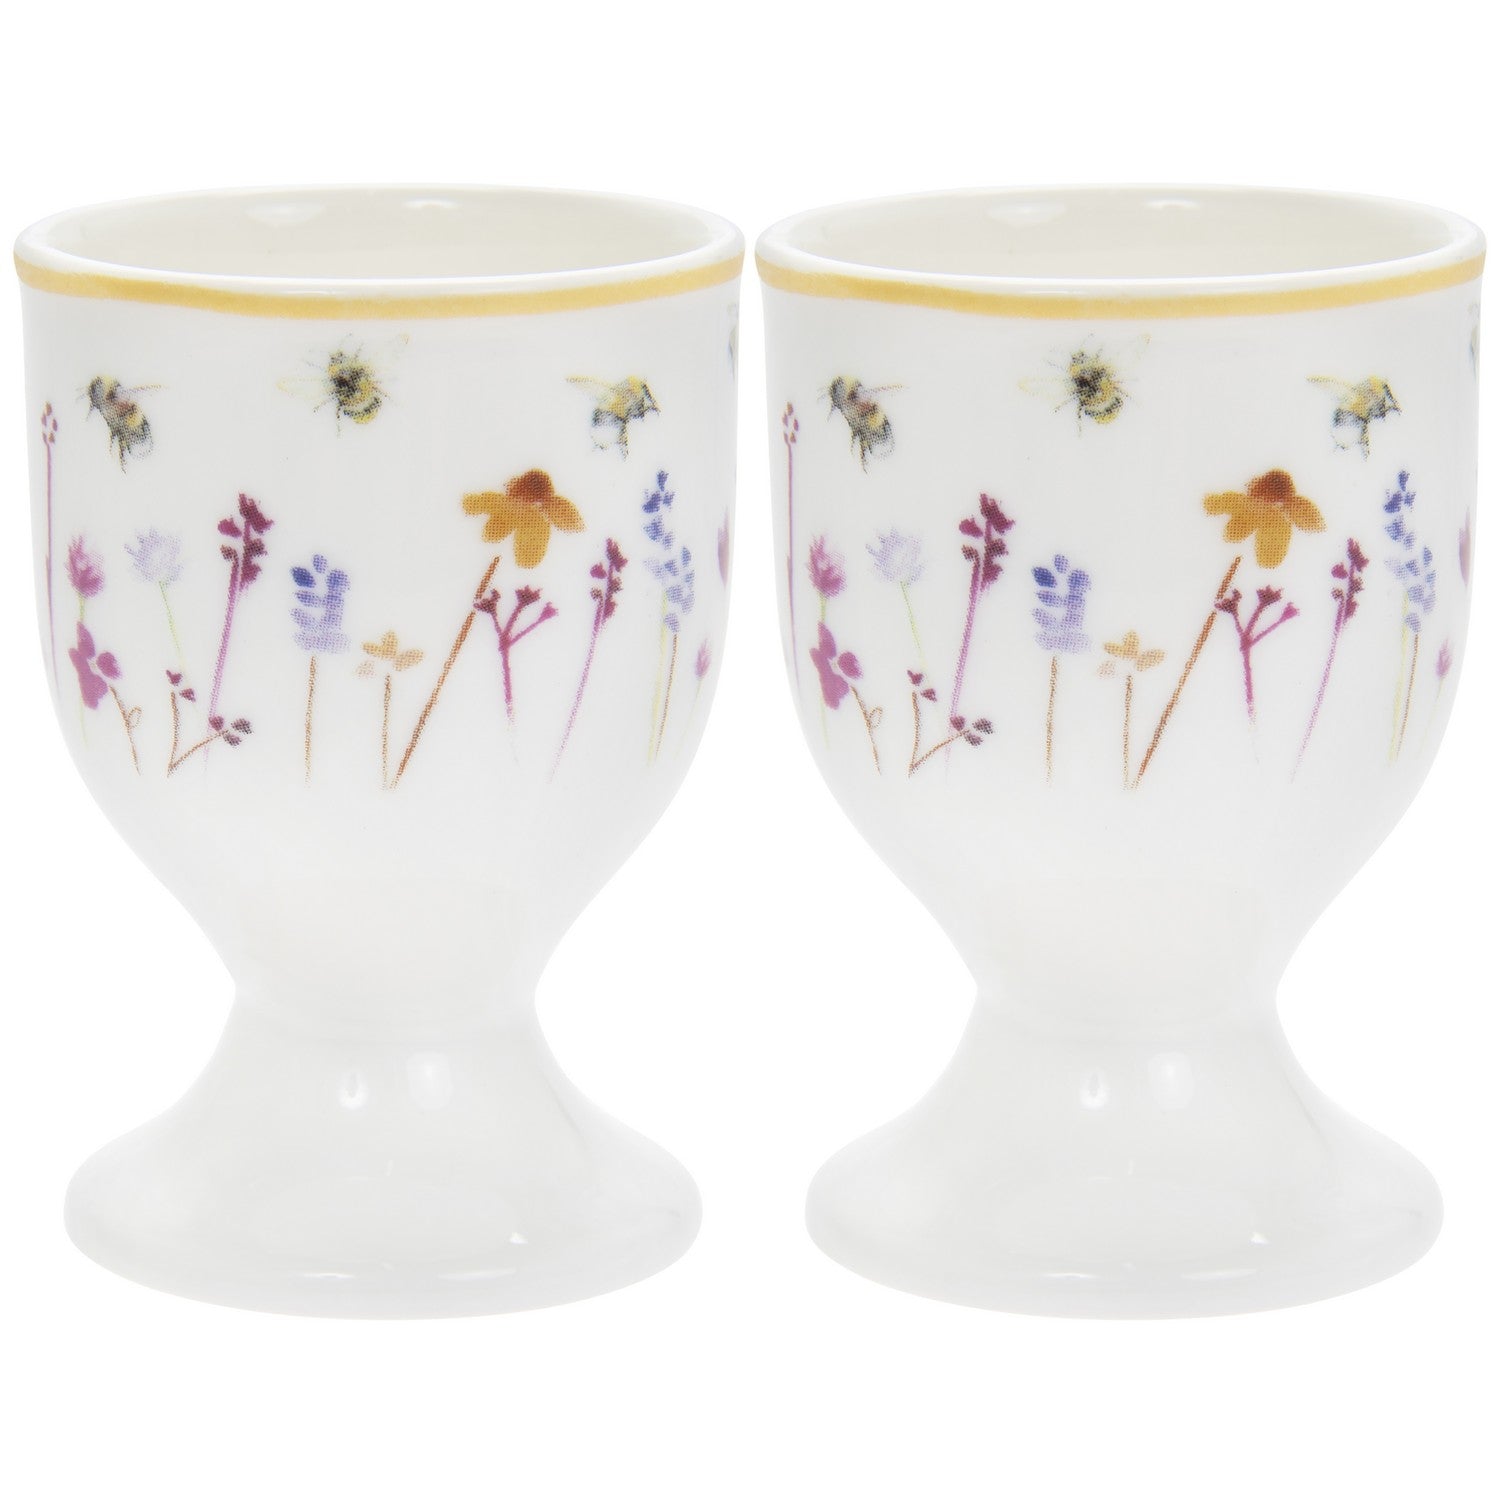 Set of 2 Bees & Flowers Egg Cups